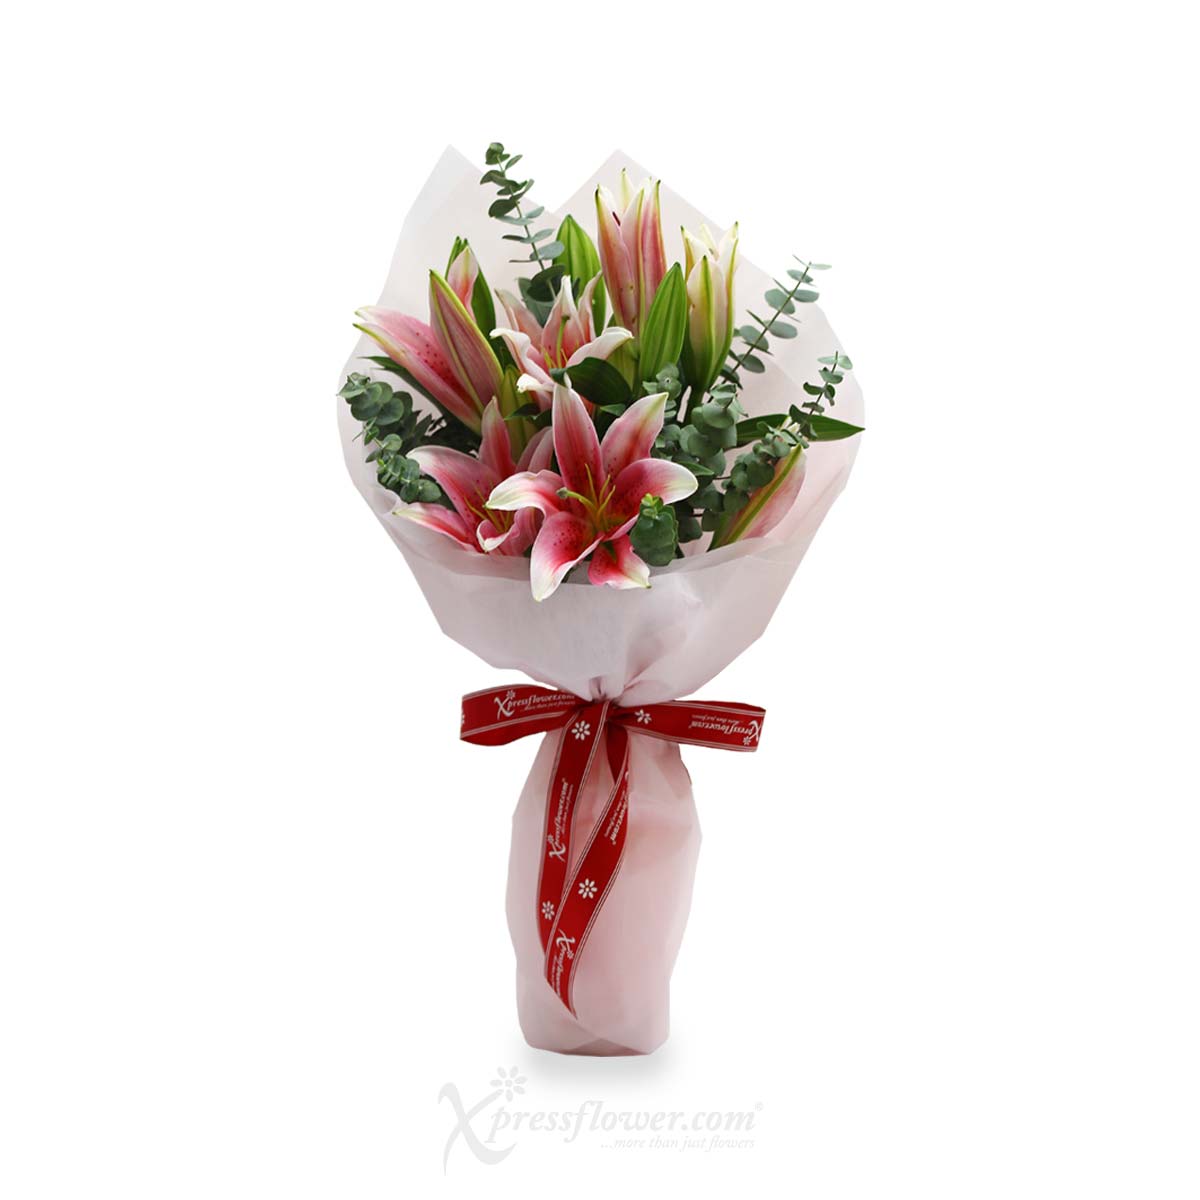 JH2306 Blushing Lilies (3 Pink Lily Sprays with The Jelly Hearts Cake) 1b 11082023YJ